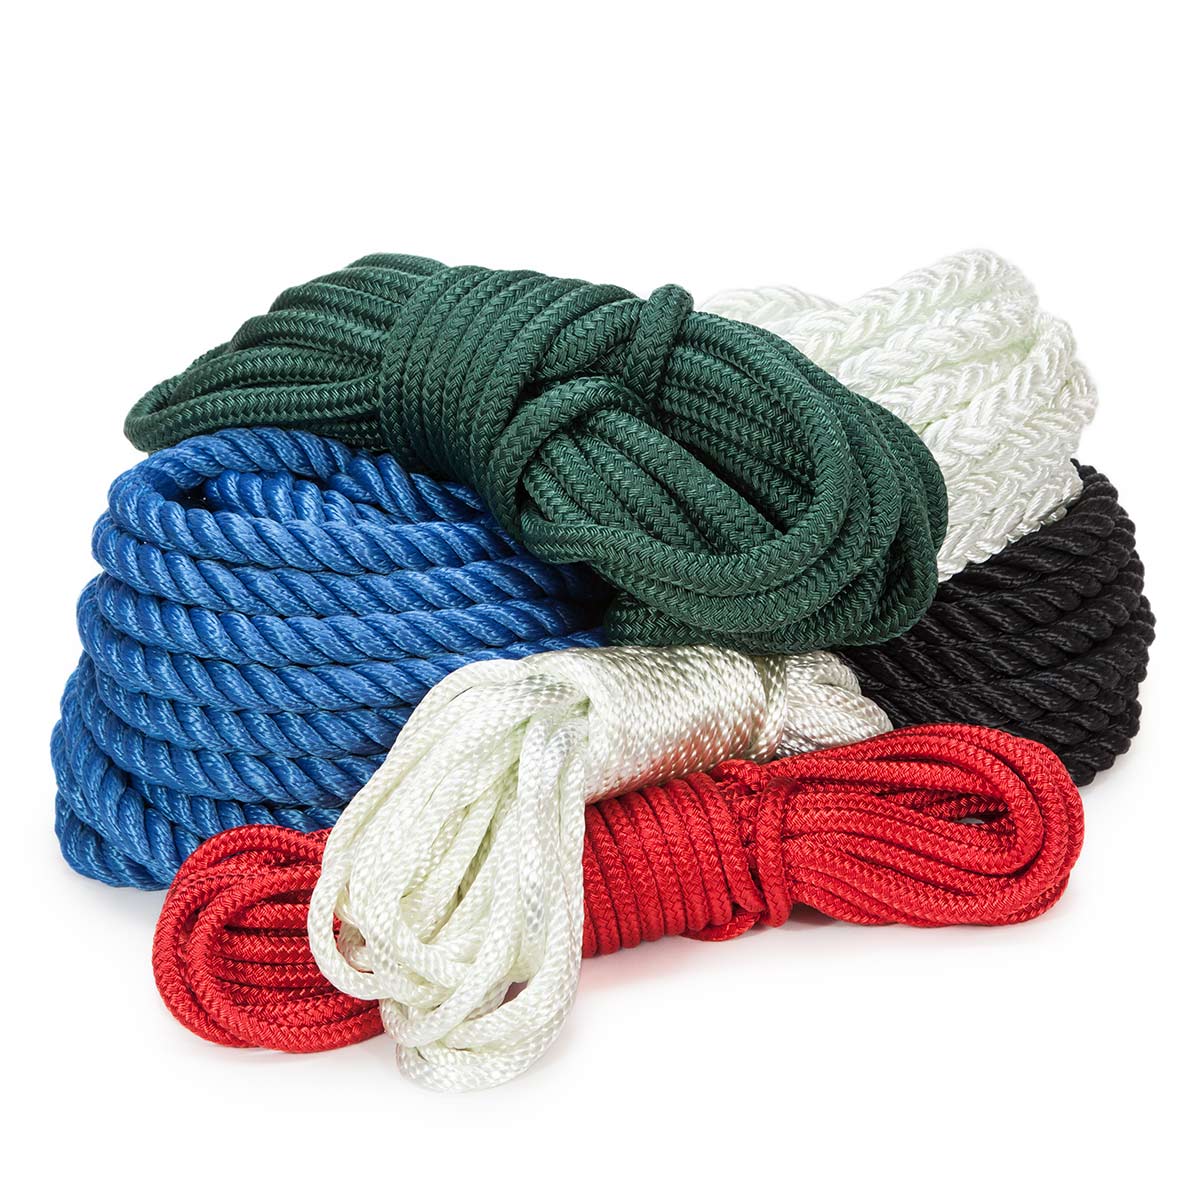 Manila Rope - 3 Strand Cordage Twisted Braided Rope - Thick Natural Fiber Rope for Nautical, Marine, Decorative Rope for Crafts, Porch Column, Outdoor